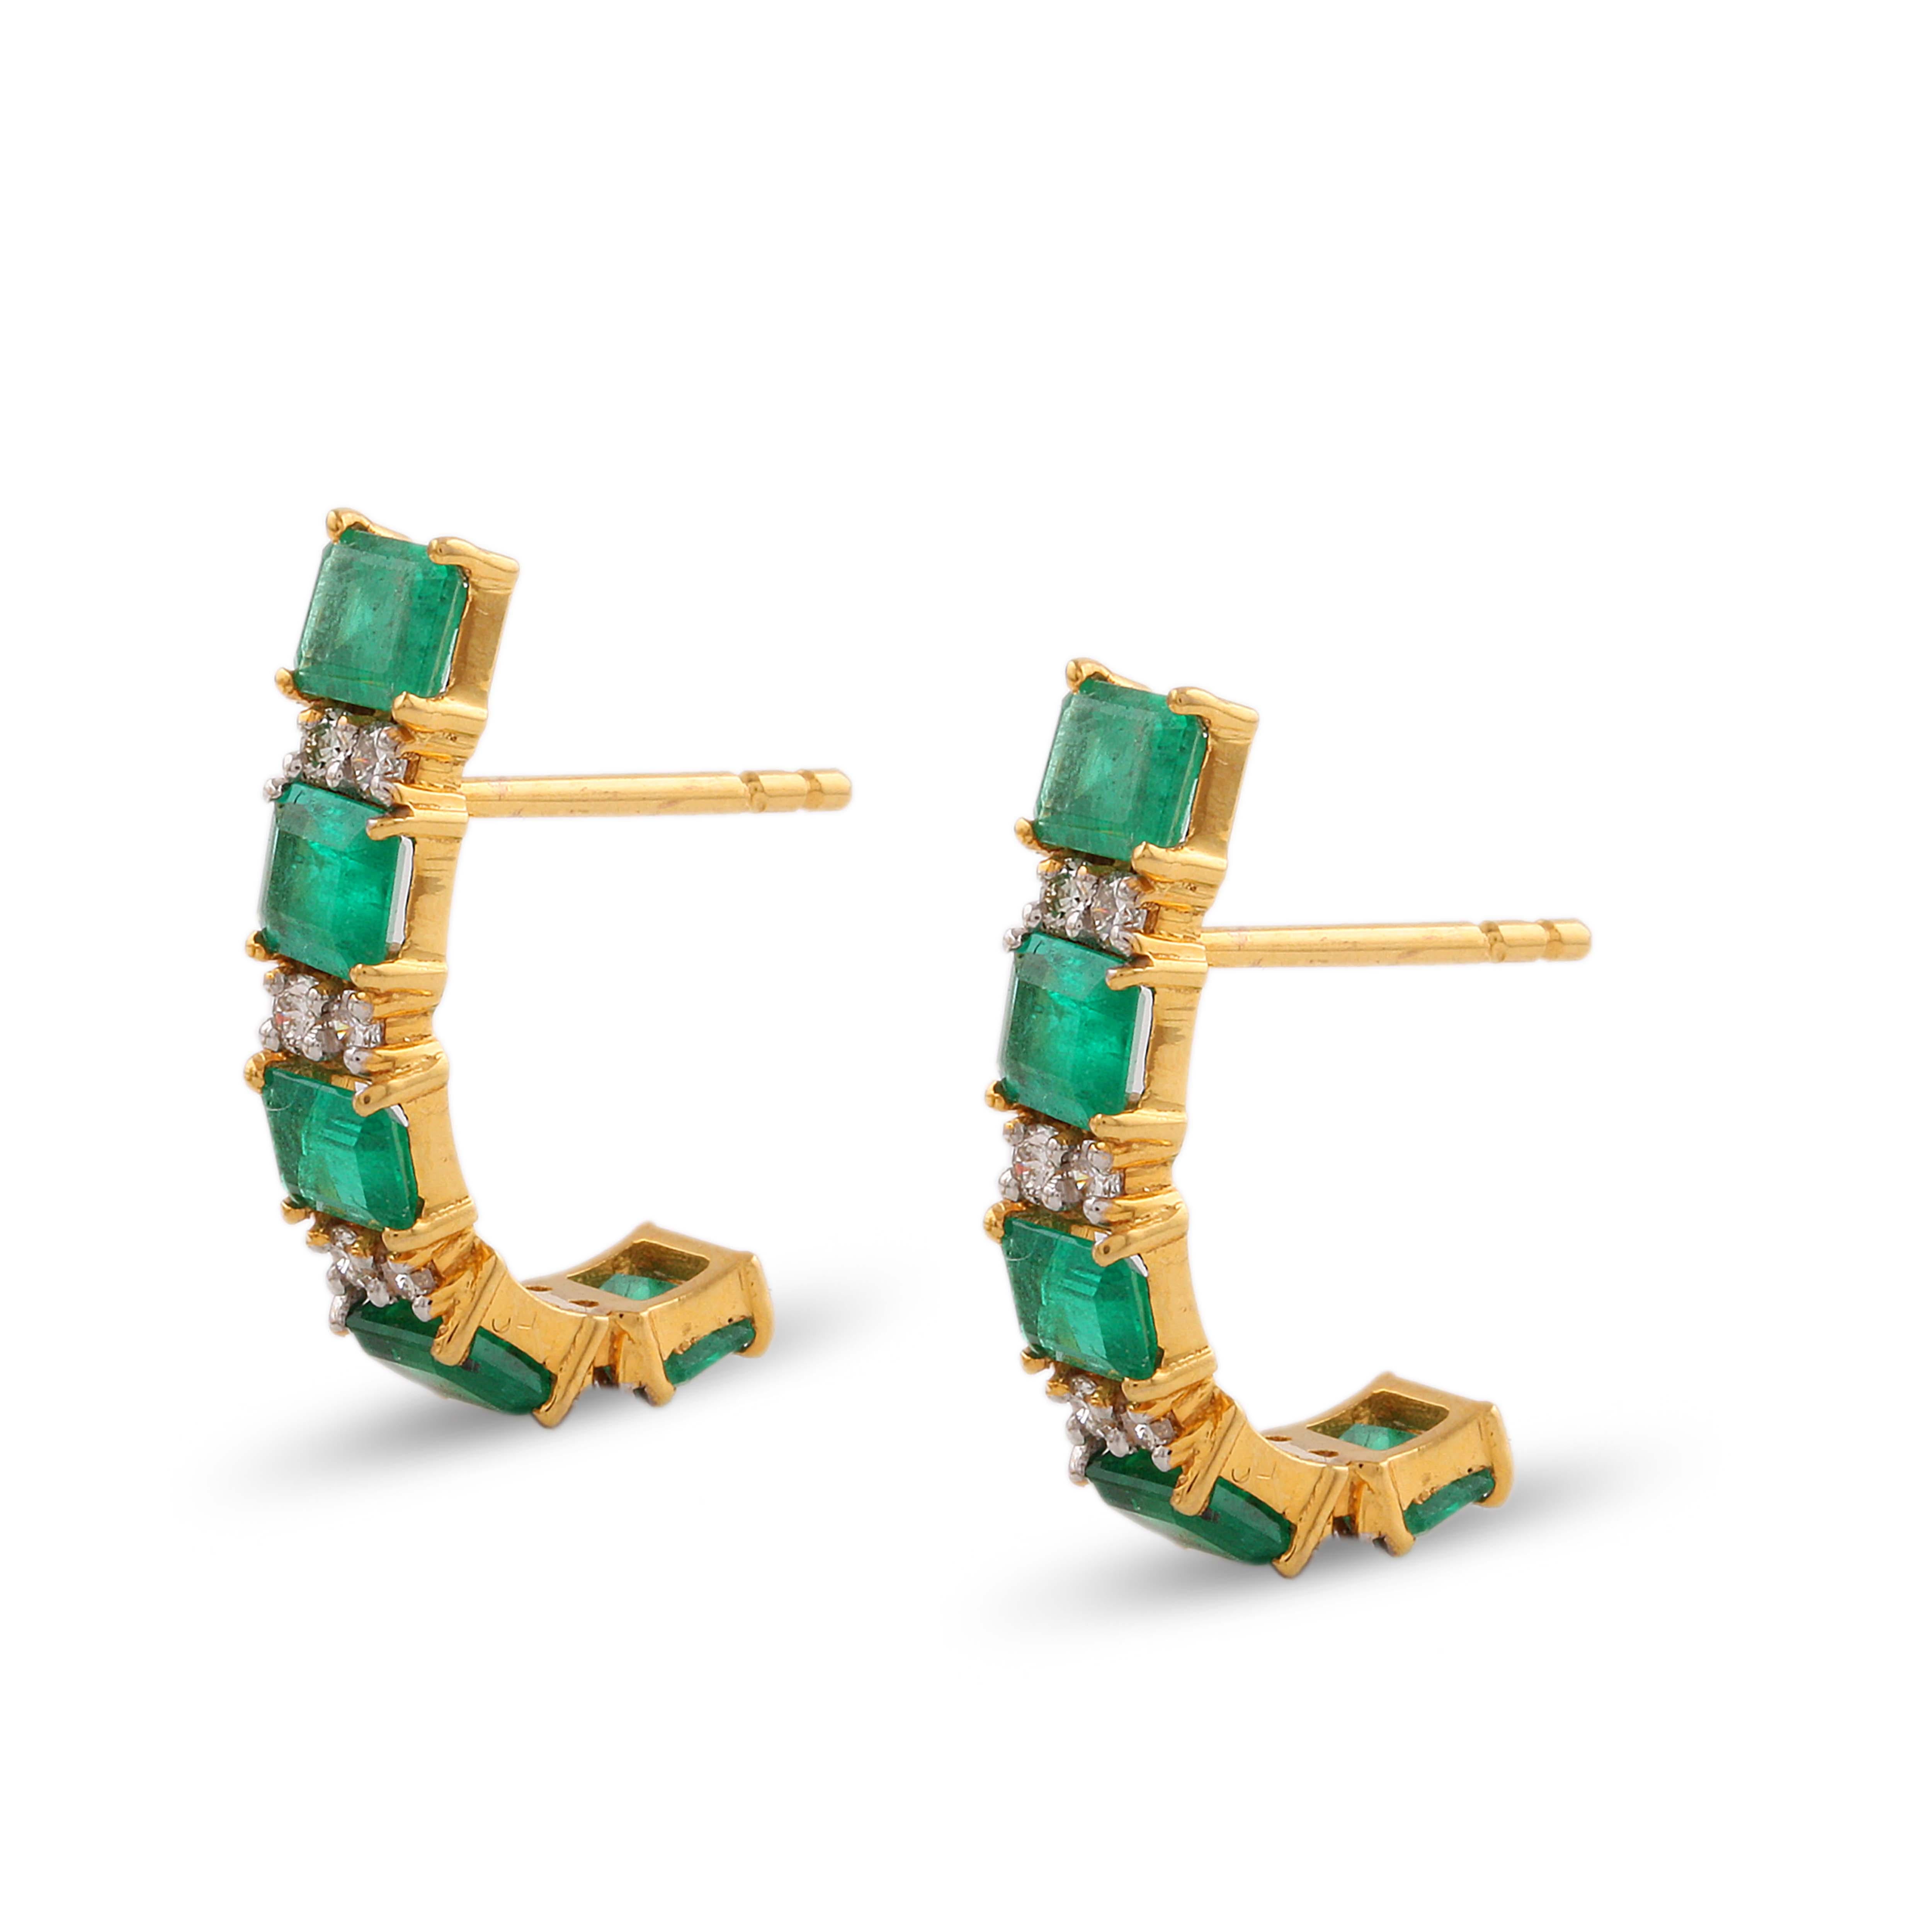 Tresor Beautiful Earring feature 2.40 carats of Emerald and 0.25 carats of Diamond. The Earring is an ode to the luxurious yet classic beauty with sparkly gemstones and feminine hues. Their contemporary and modern design make them perfect and